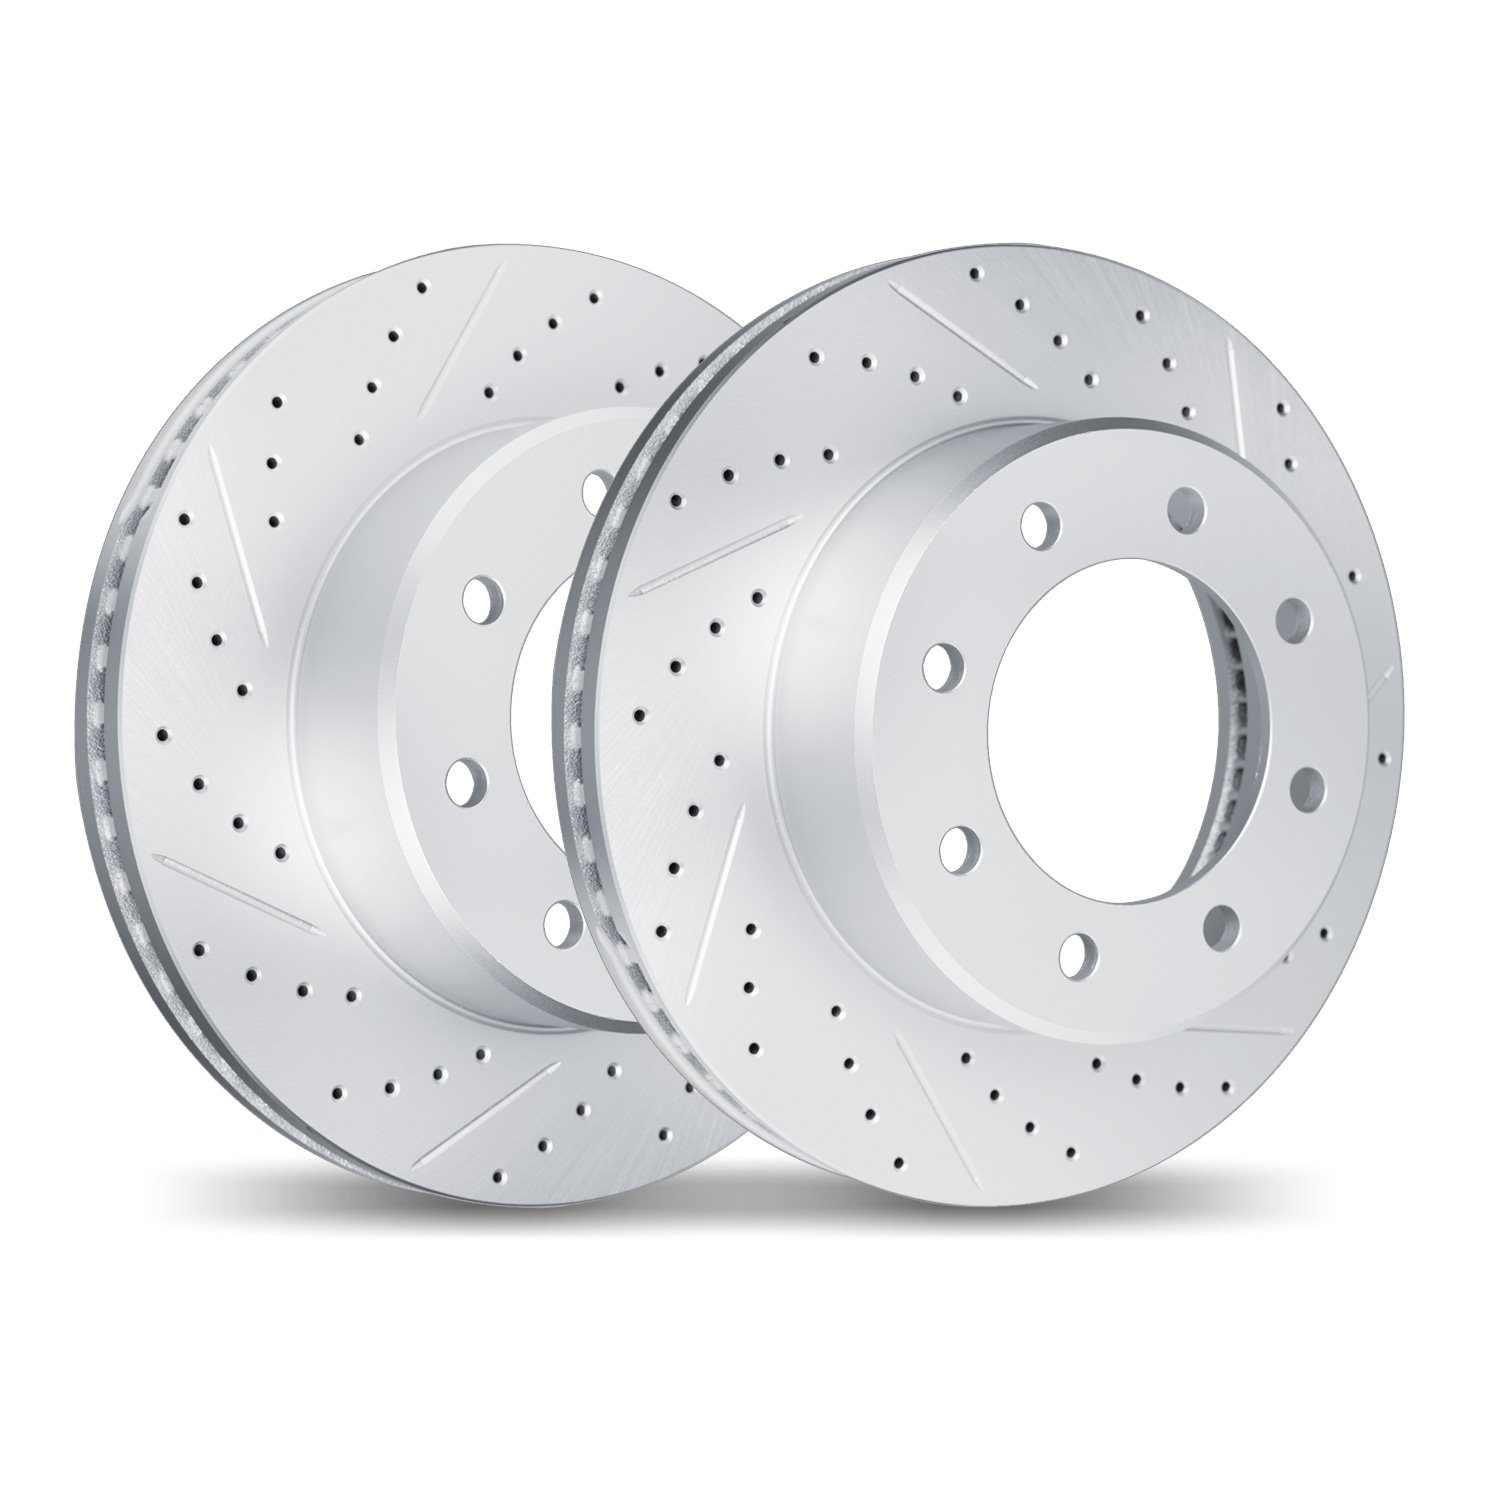 2002-54035 Geoperformance Drilled/Slotted Brake Rotors, 2003-2005 Ford/Lincoln/Mercury/Mazda, Position: Front